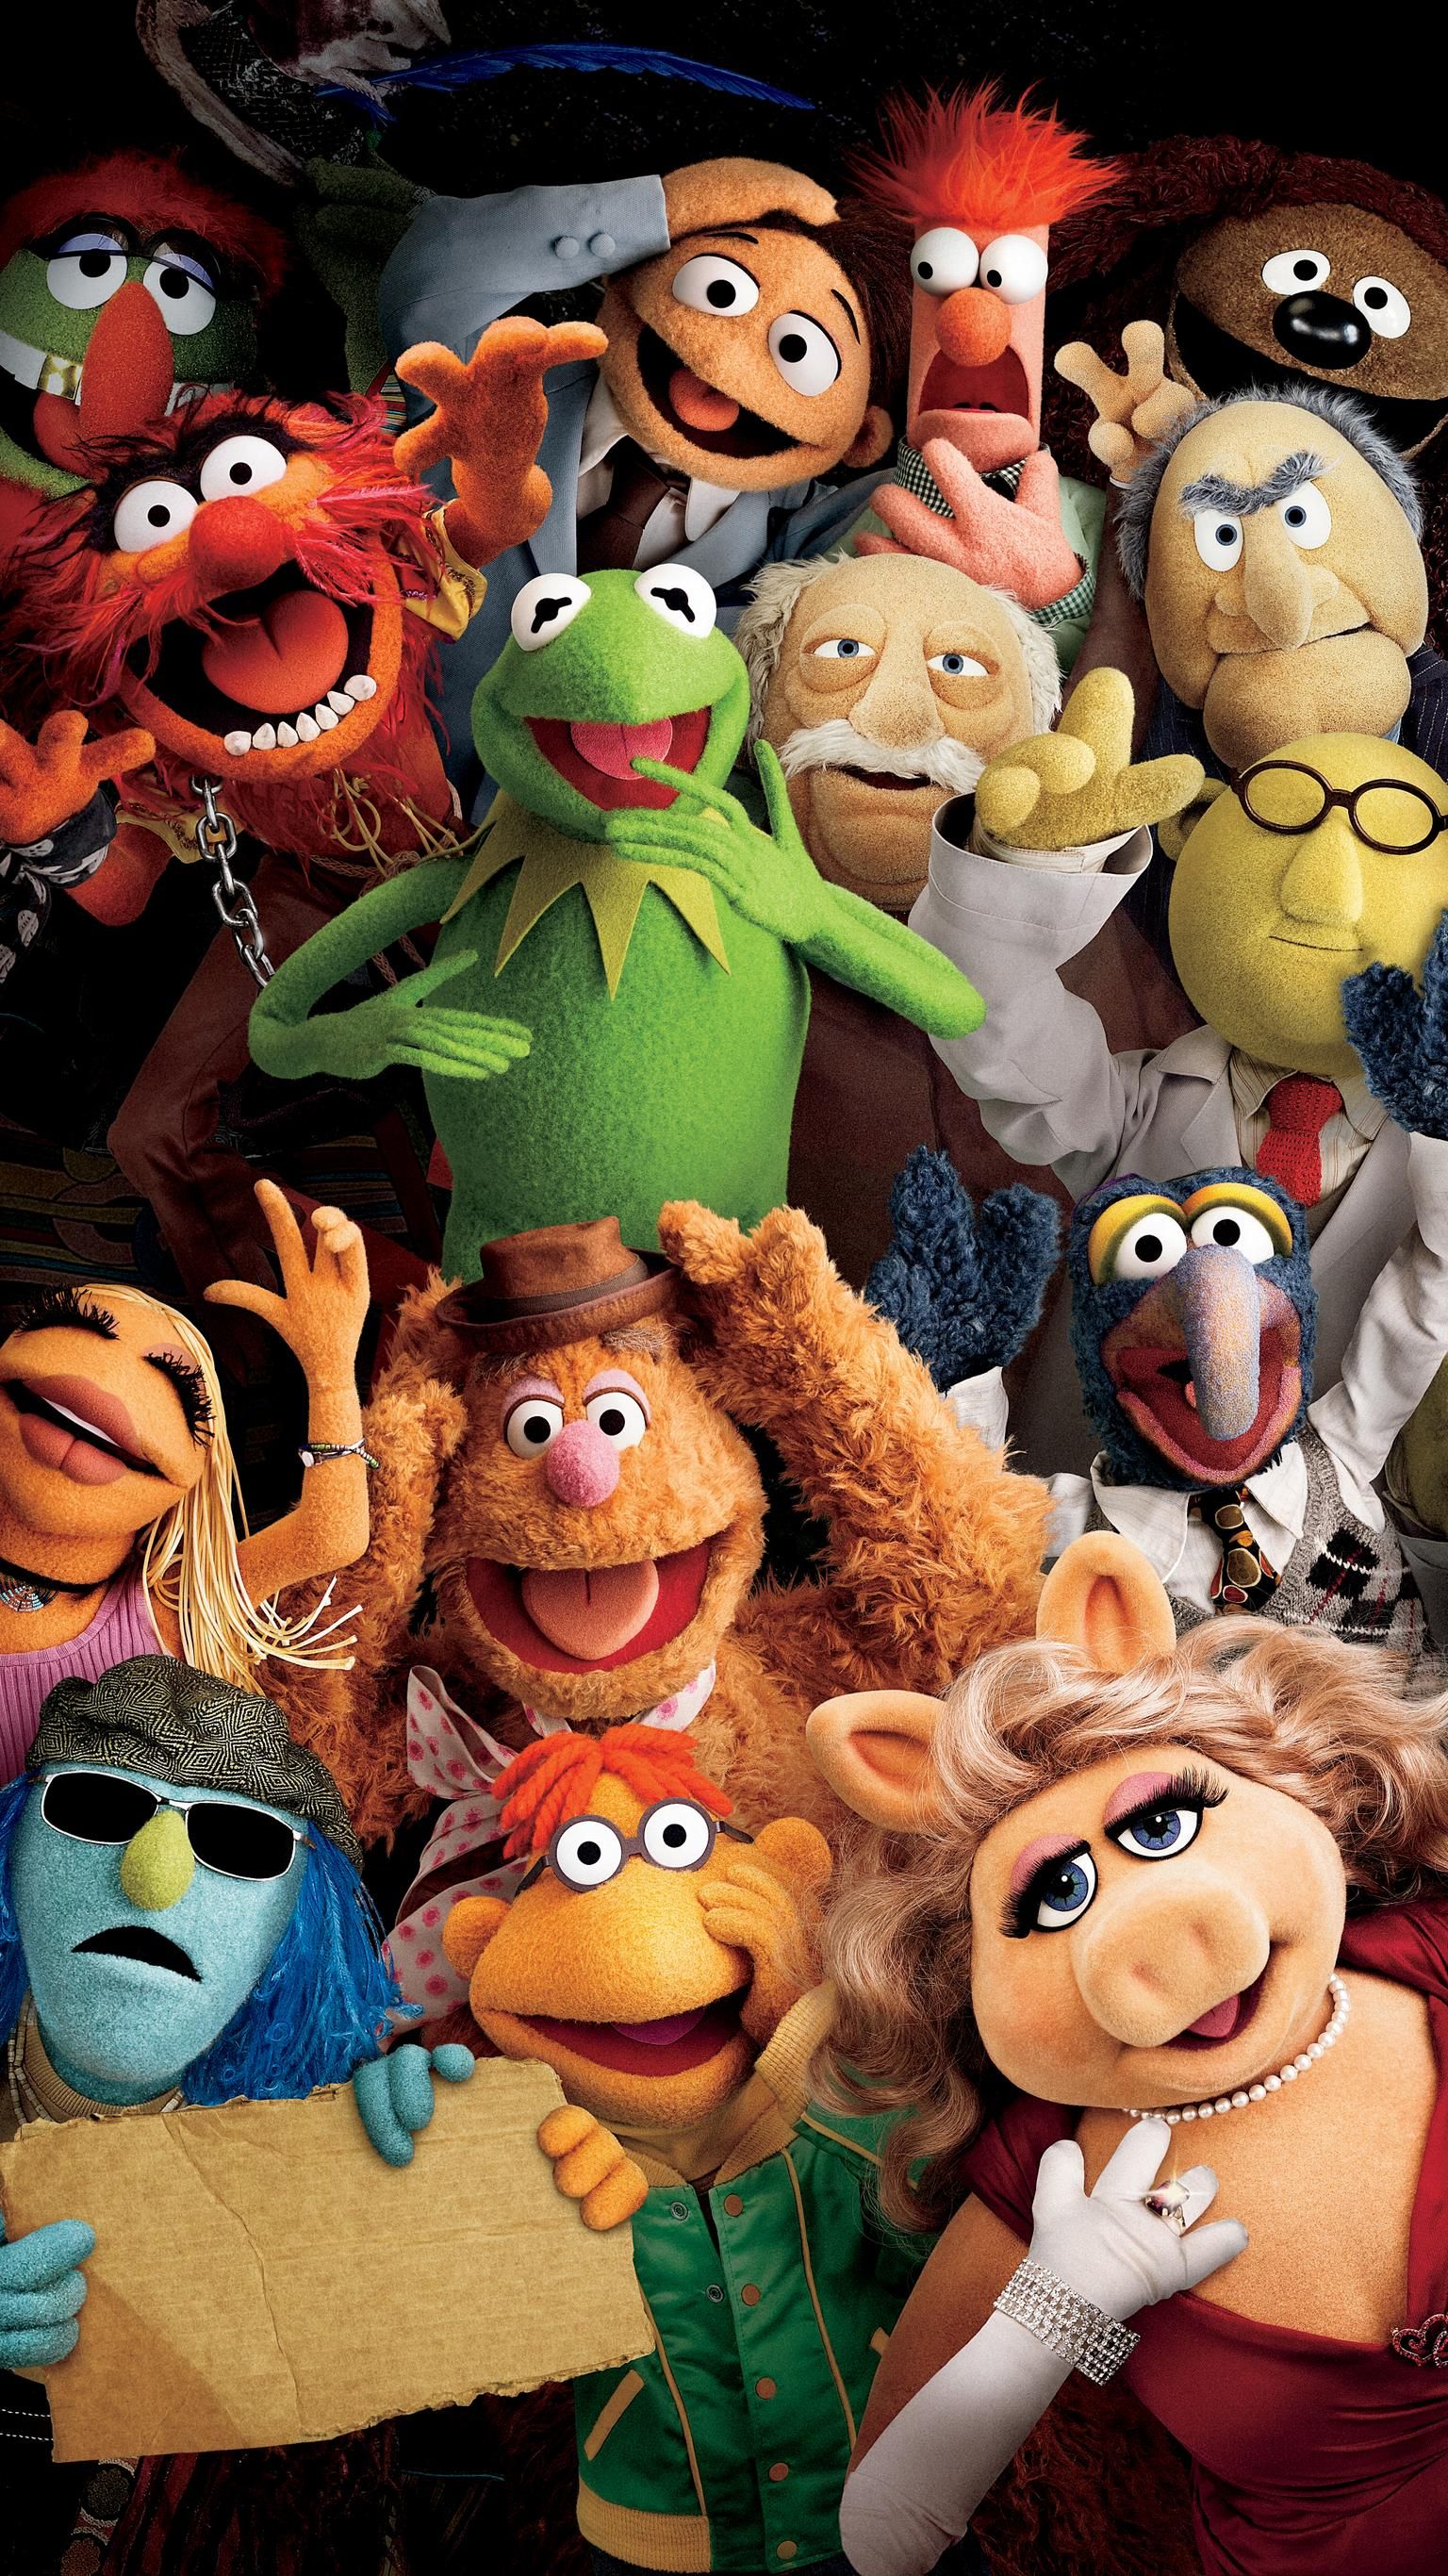 The Muppets (2011) Phone Wallpaper. Moviemania. Muppets, The muppet show, The muppets characters